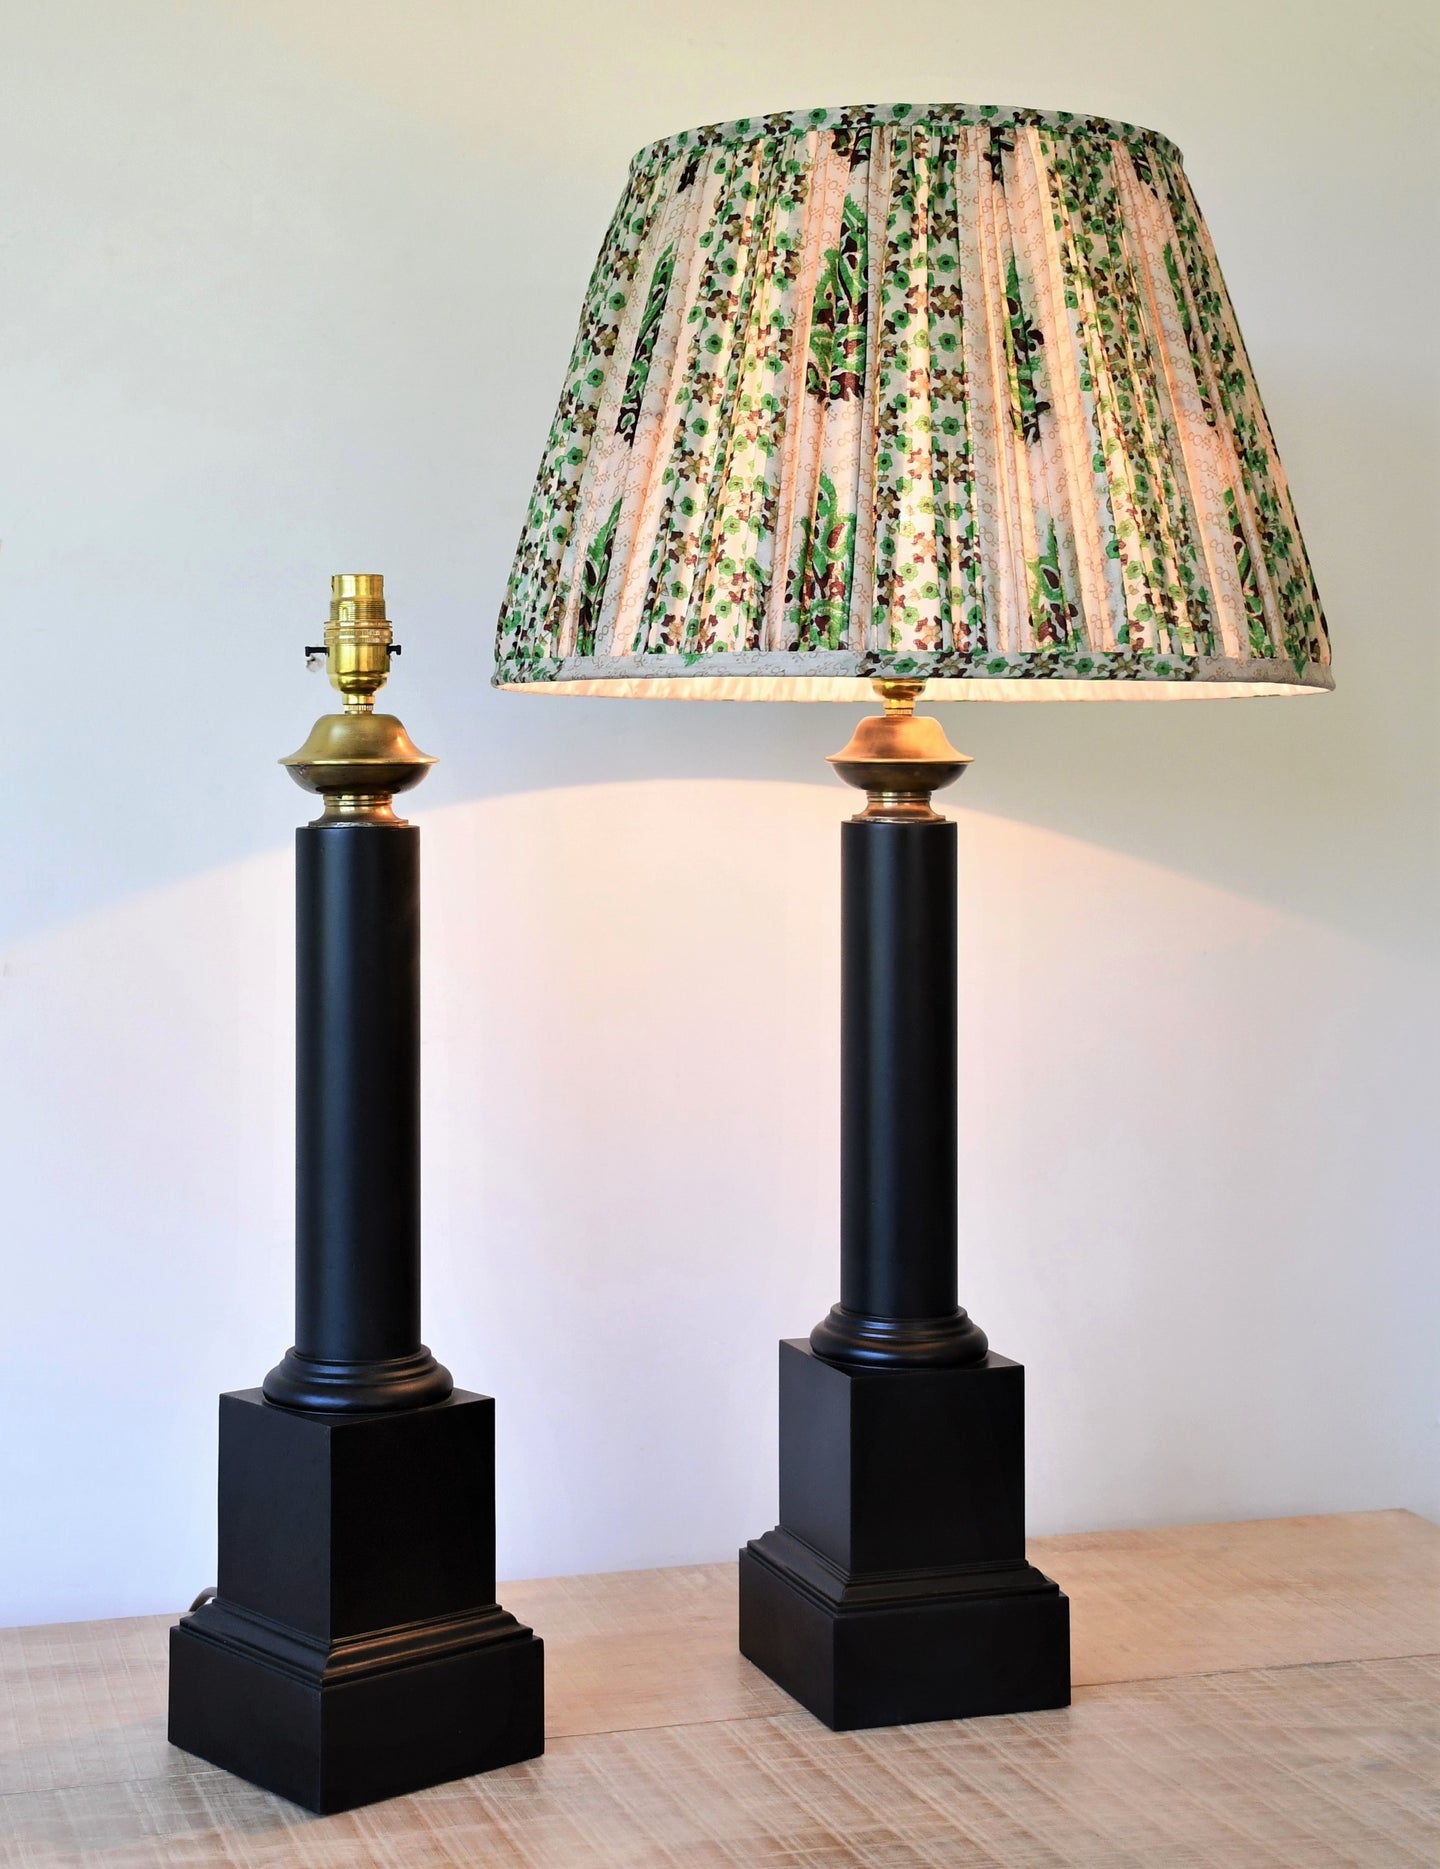 A Pair of Mid 20th Century - French Table Lamps